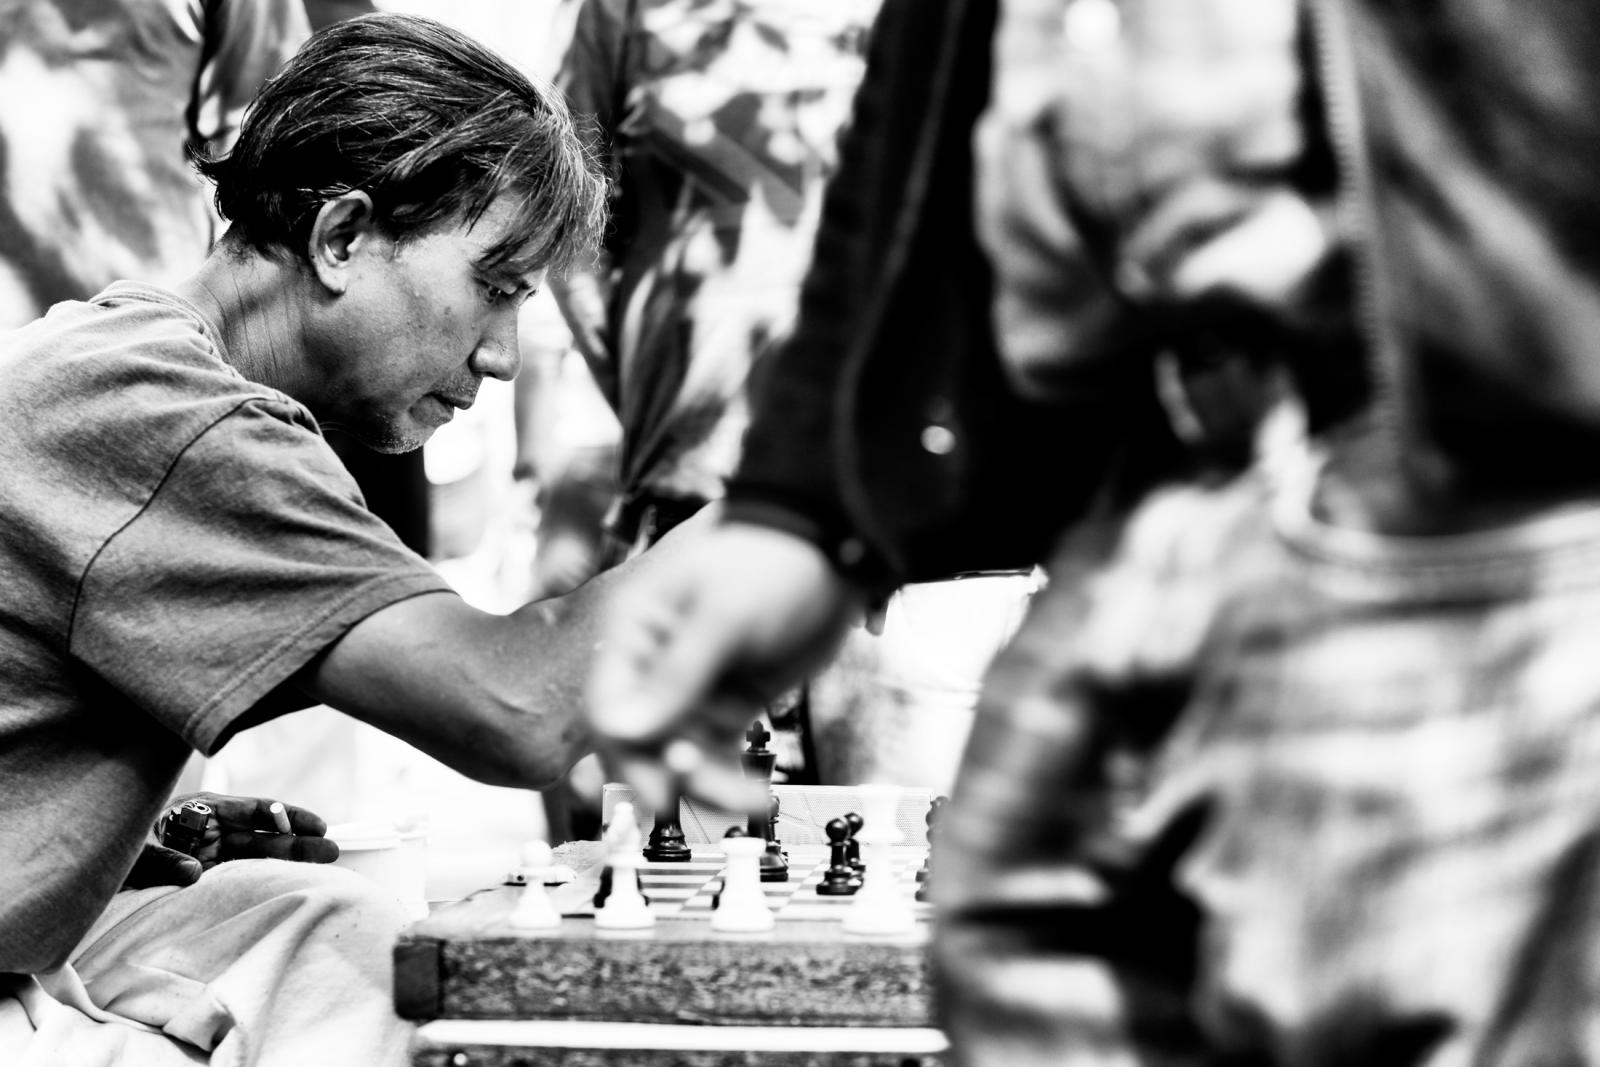 Chess game in exchange for donation, Union Square, New York. Fall 2015.